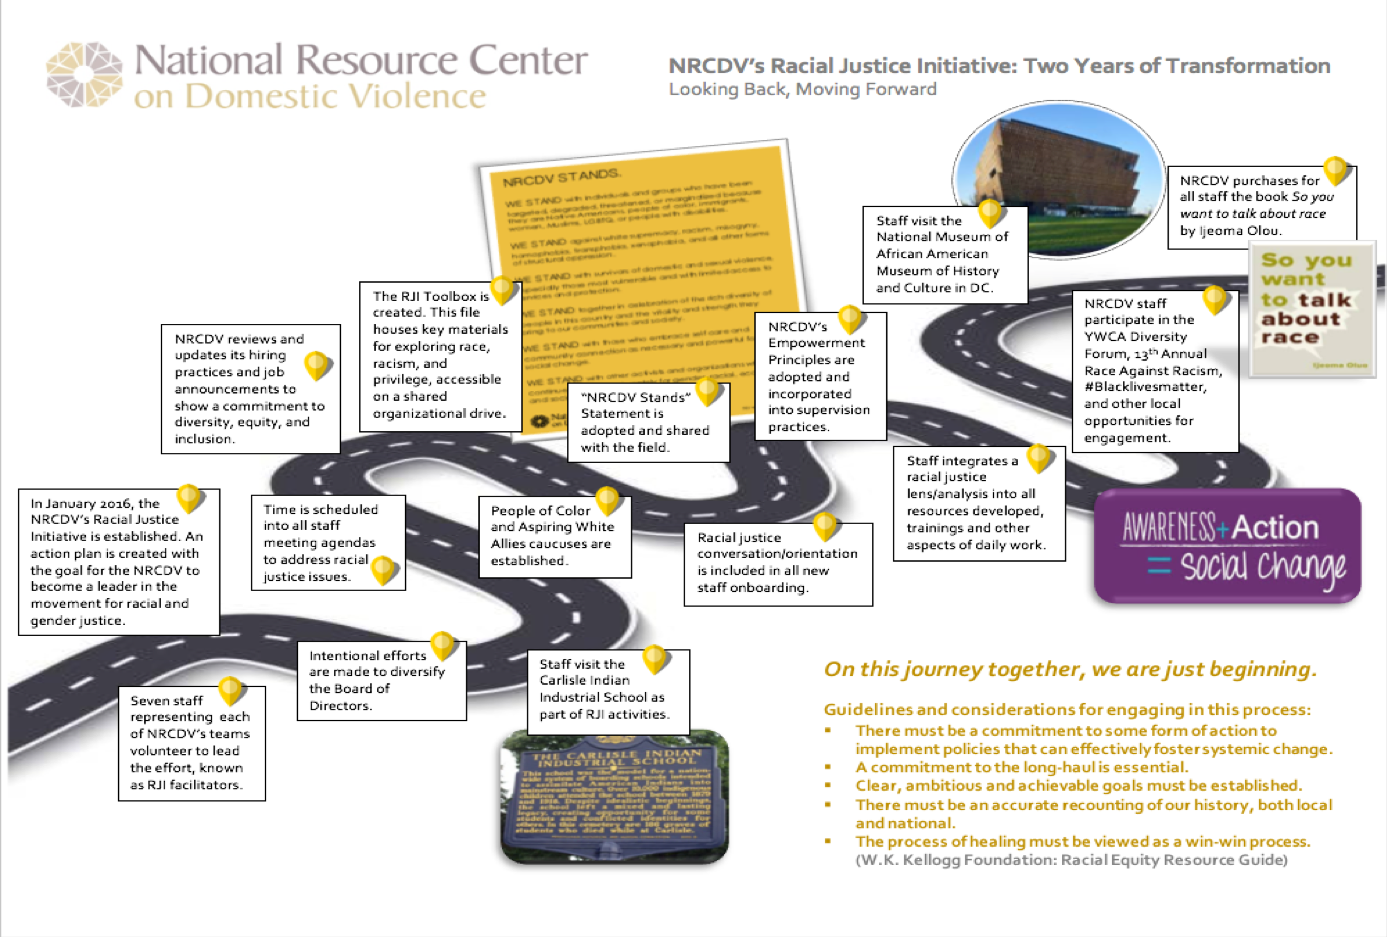 A paved winding road snakes across the page. At multiple places along the road there are text boxes and images marking important events in NRCDV's two year journey in their racial justice initiative.